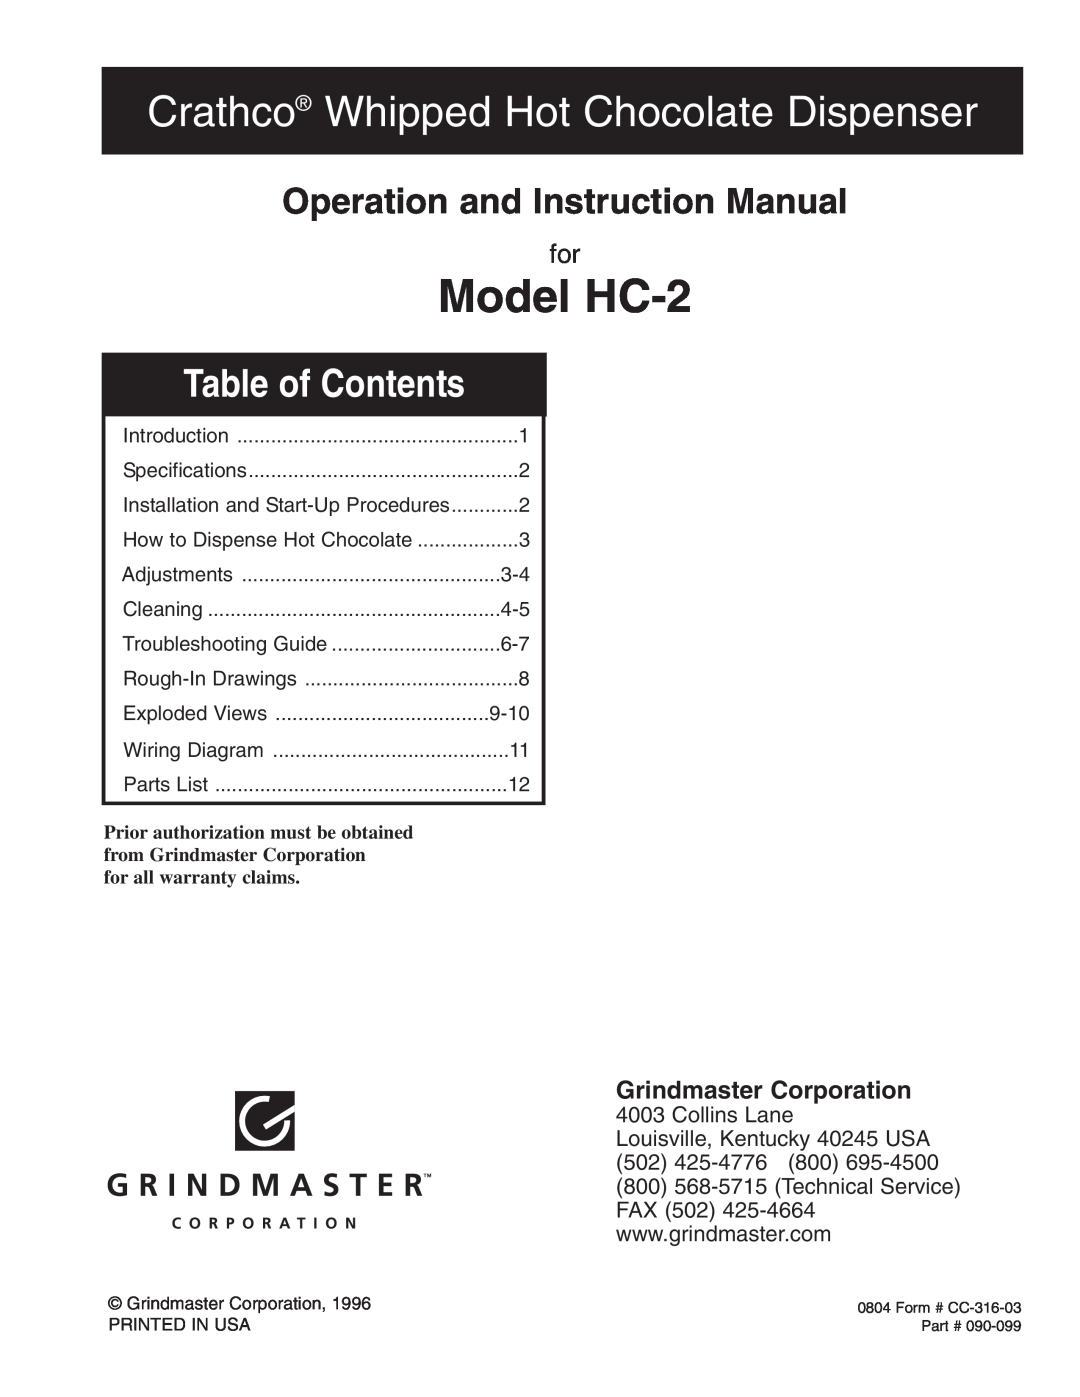 Grindmaster instruction manual Model HC-2, Crathco Whipped Hot Chocolate Dispenser, Table of Contents, Collins Lane 